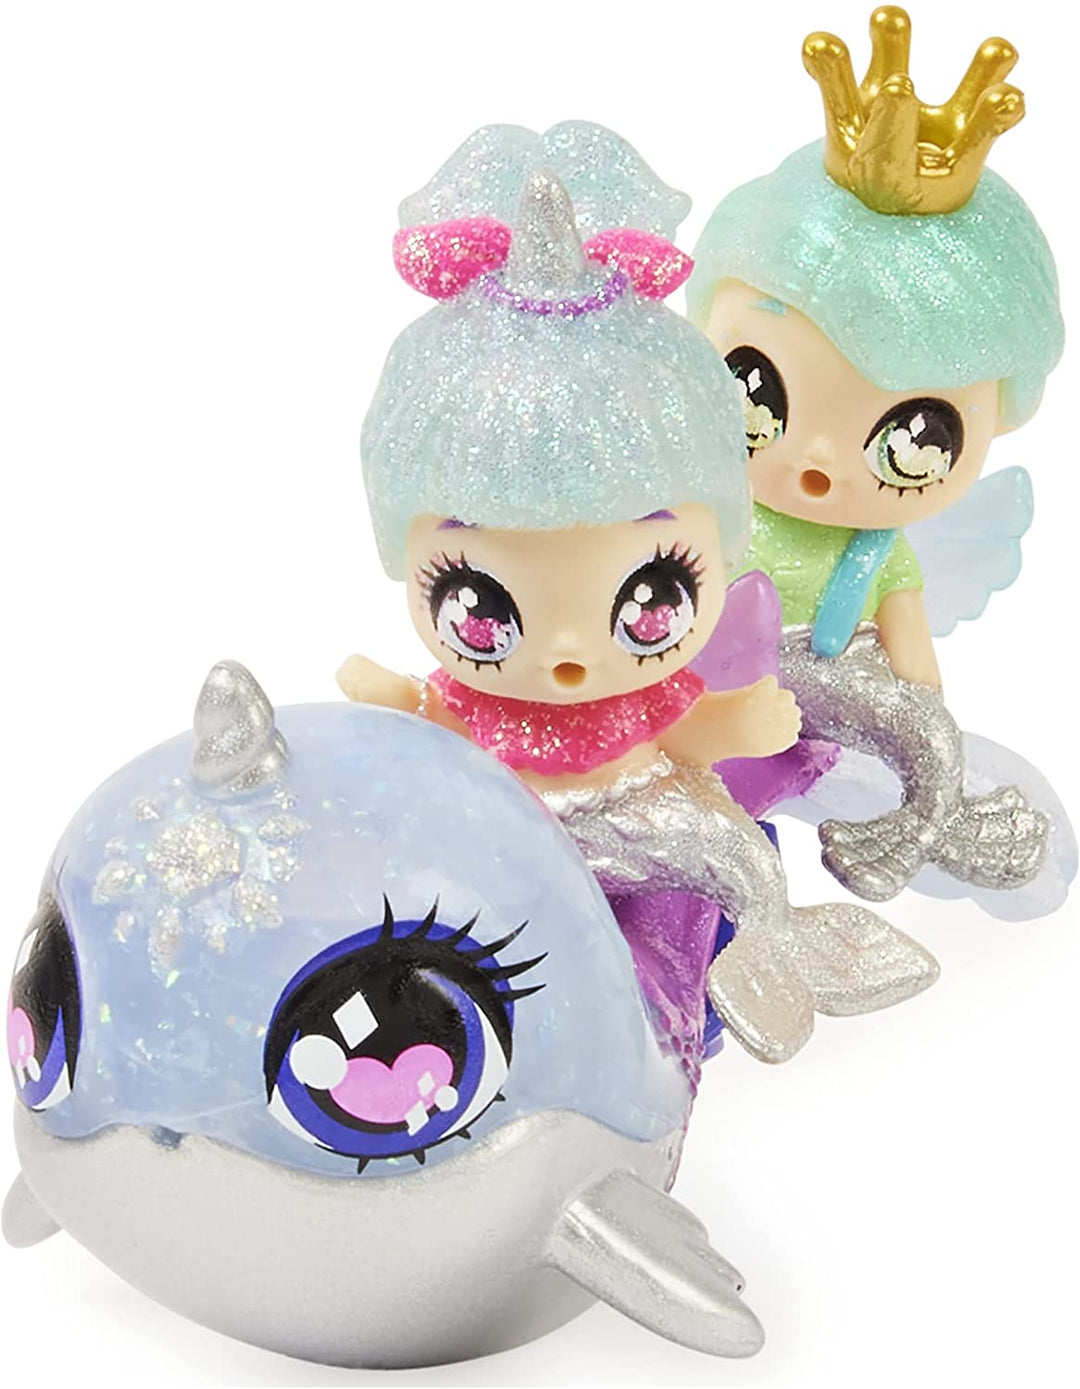 Hatchimals Pixies Riders, Shimmer Babies Baby Twins with Glider and 4 Accessories